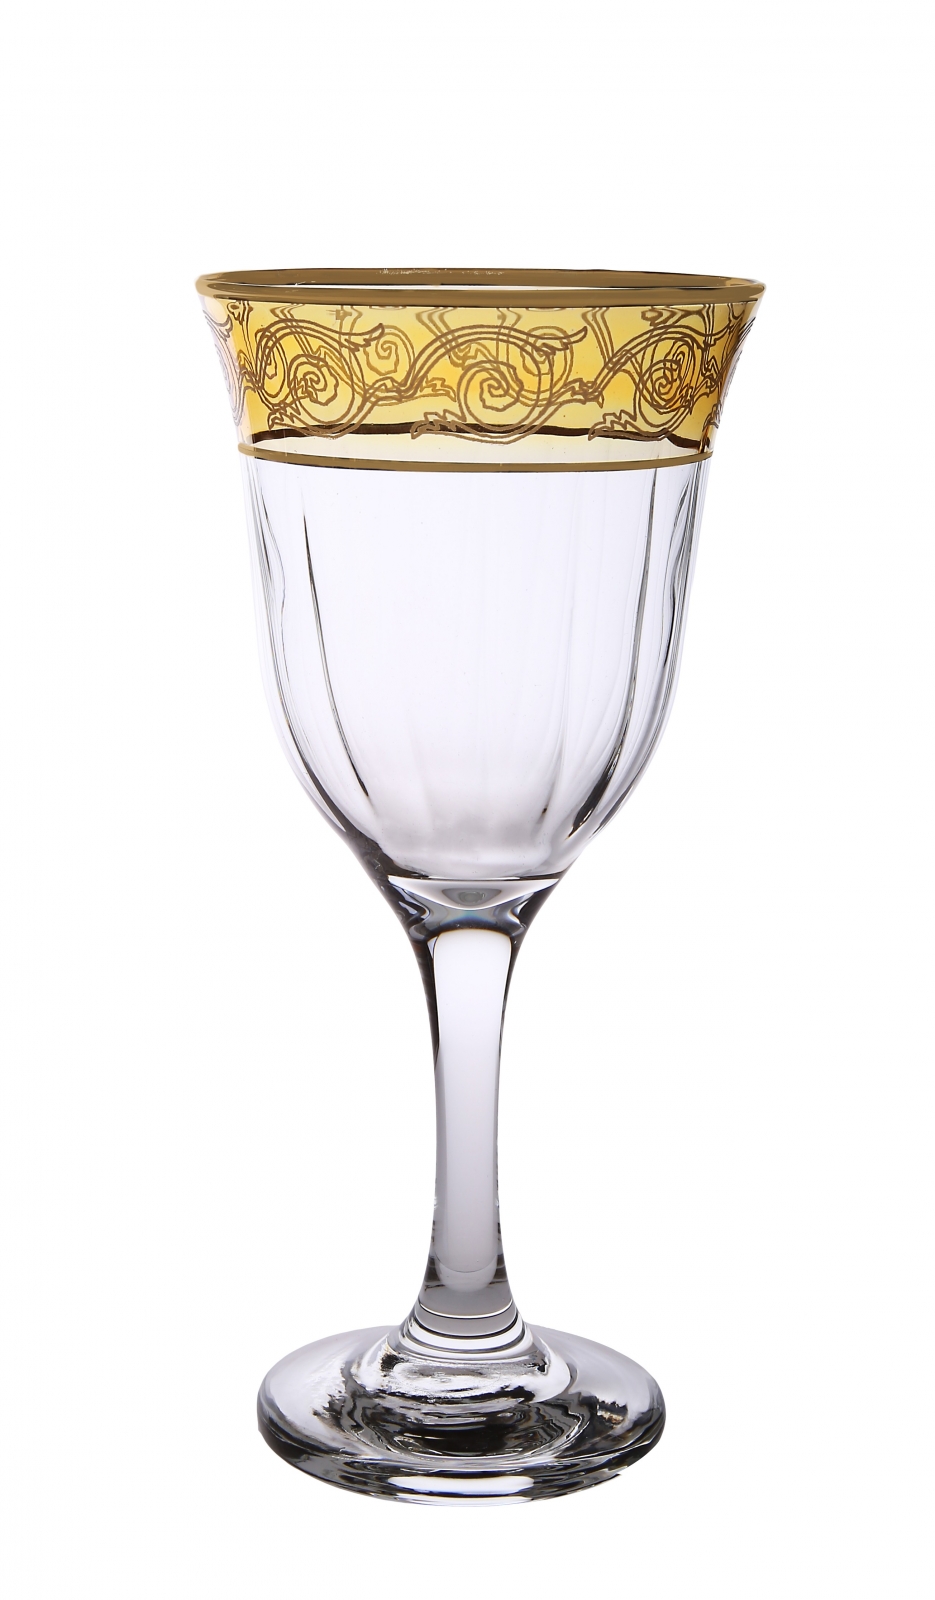 Set of 6 Amber Water Glasses with Gold Design